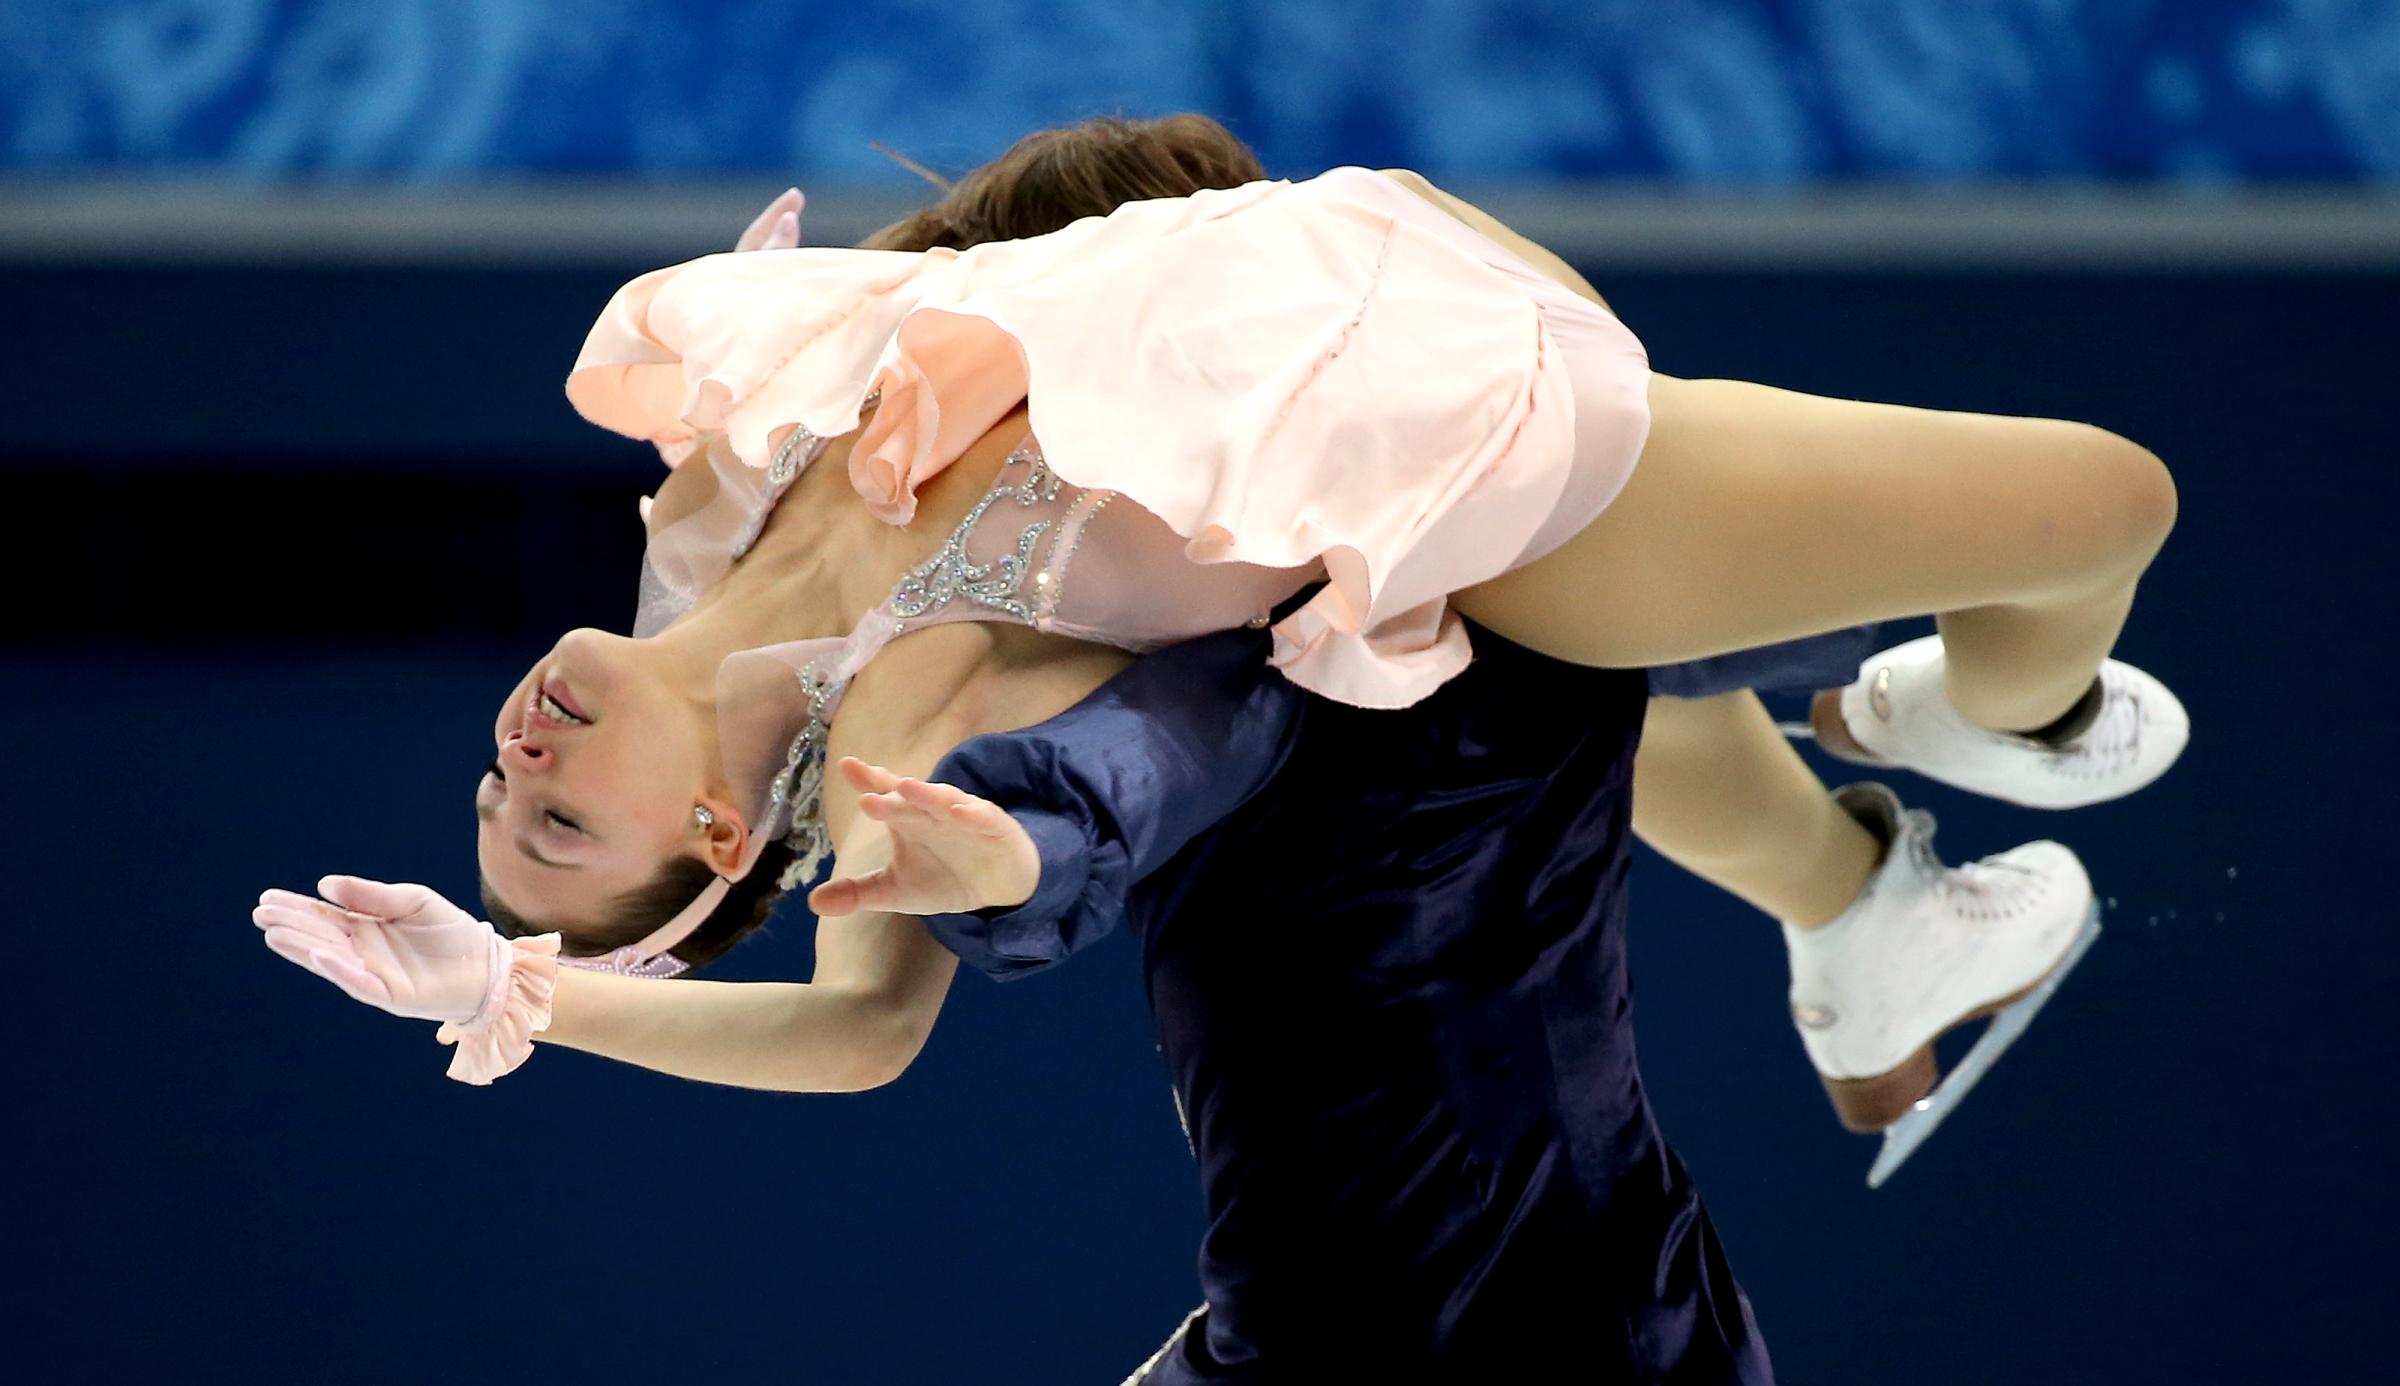 Tanja Kolbe and Stefano Caruso of Germany perform in the Figure Skating Ice Dance Free Dance at Iceberg Skating Palace.